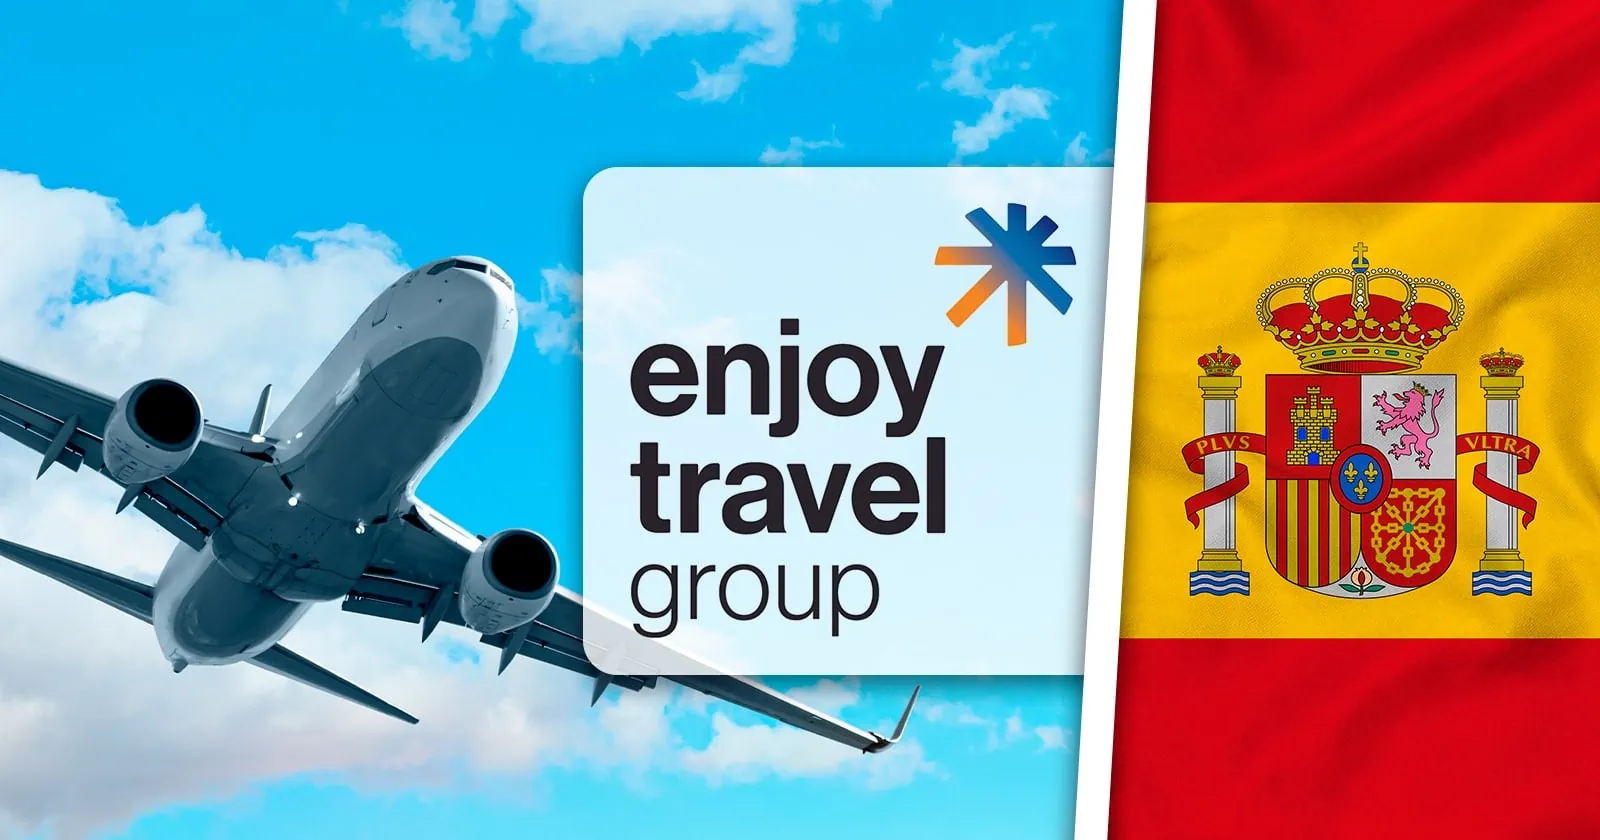 New Accessible Tourism Air Route Spain – Cuba with Enjoy Travel Group